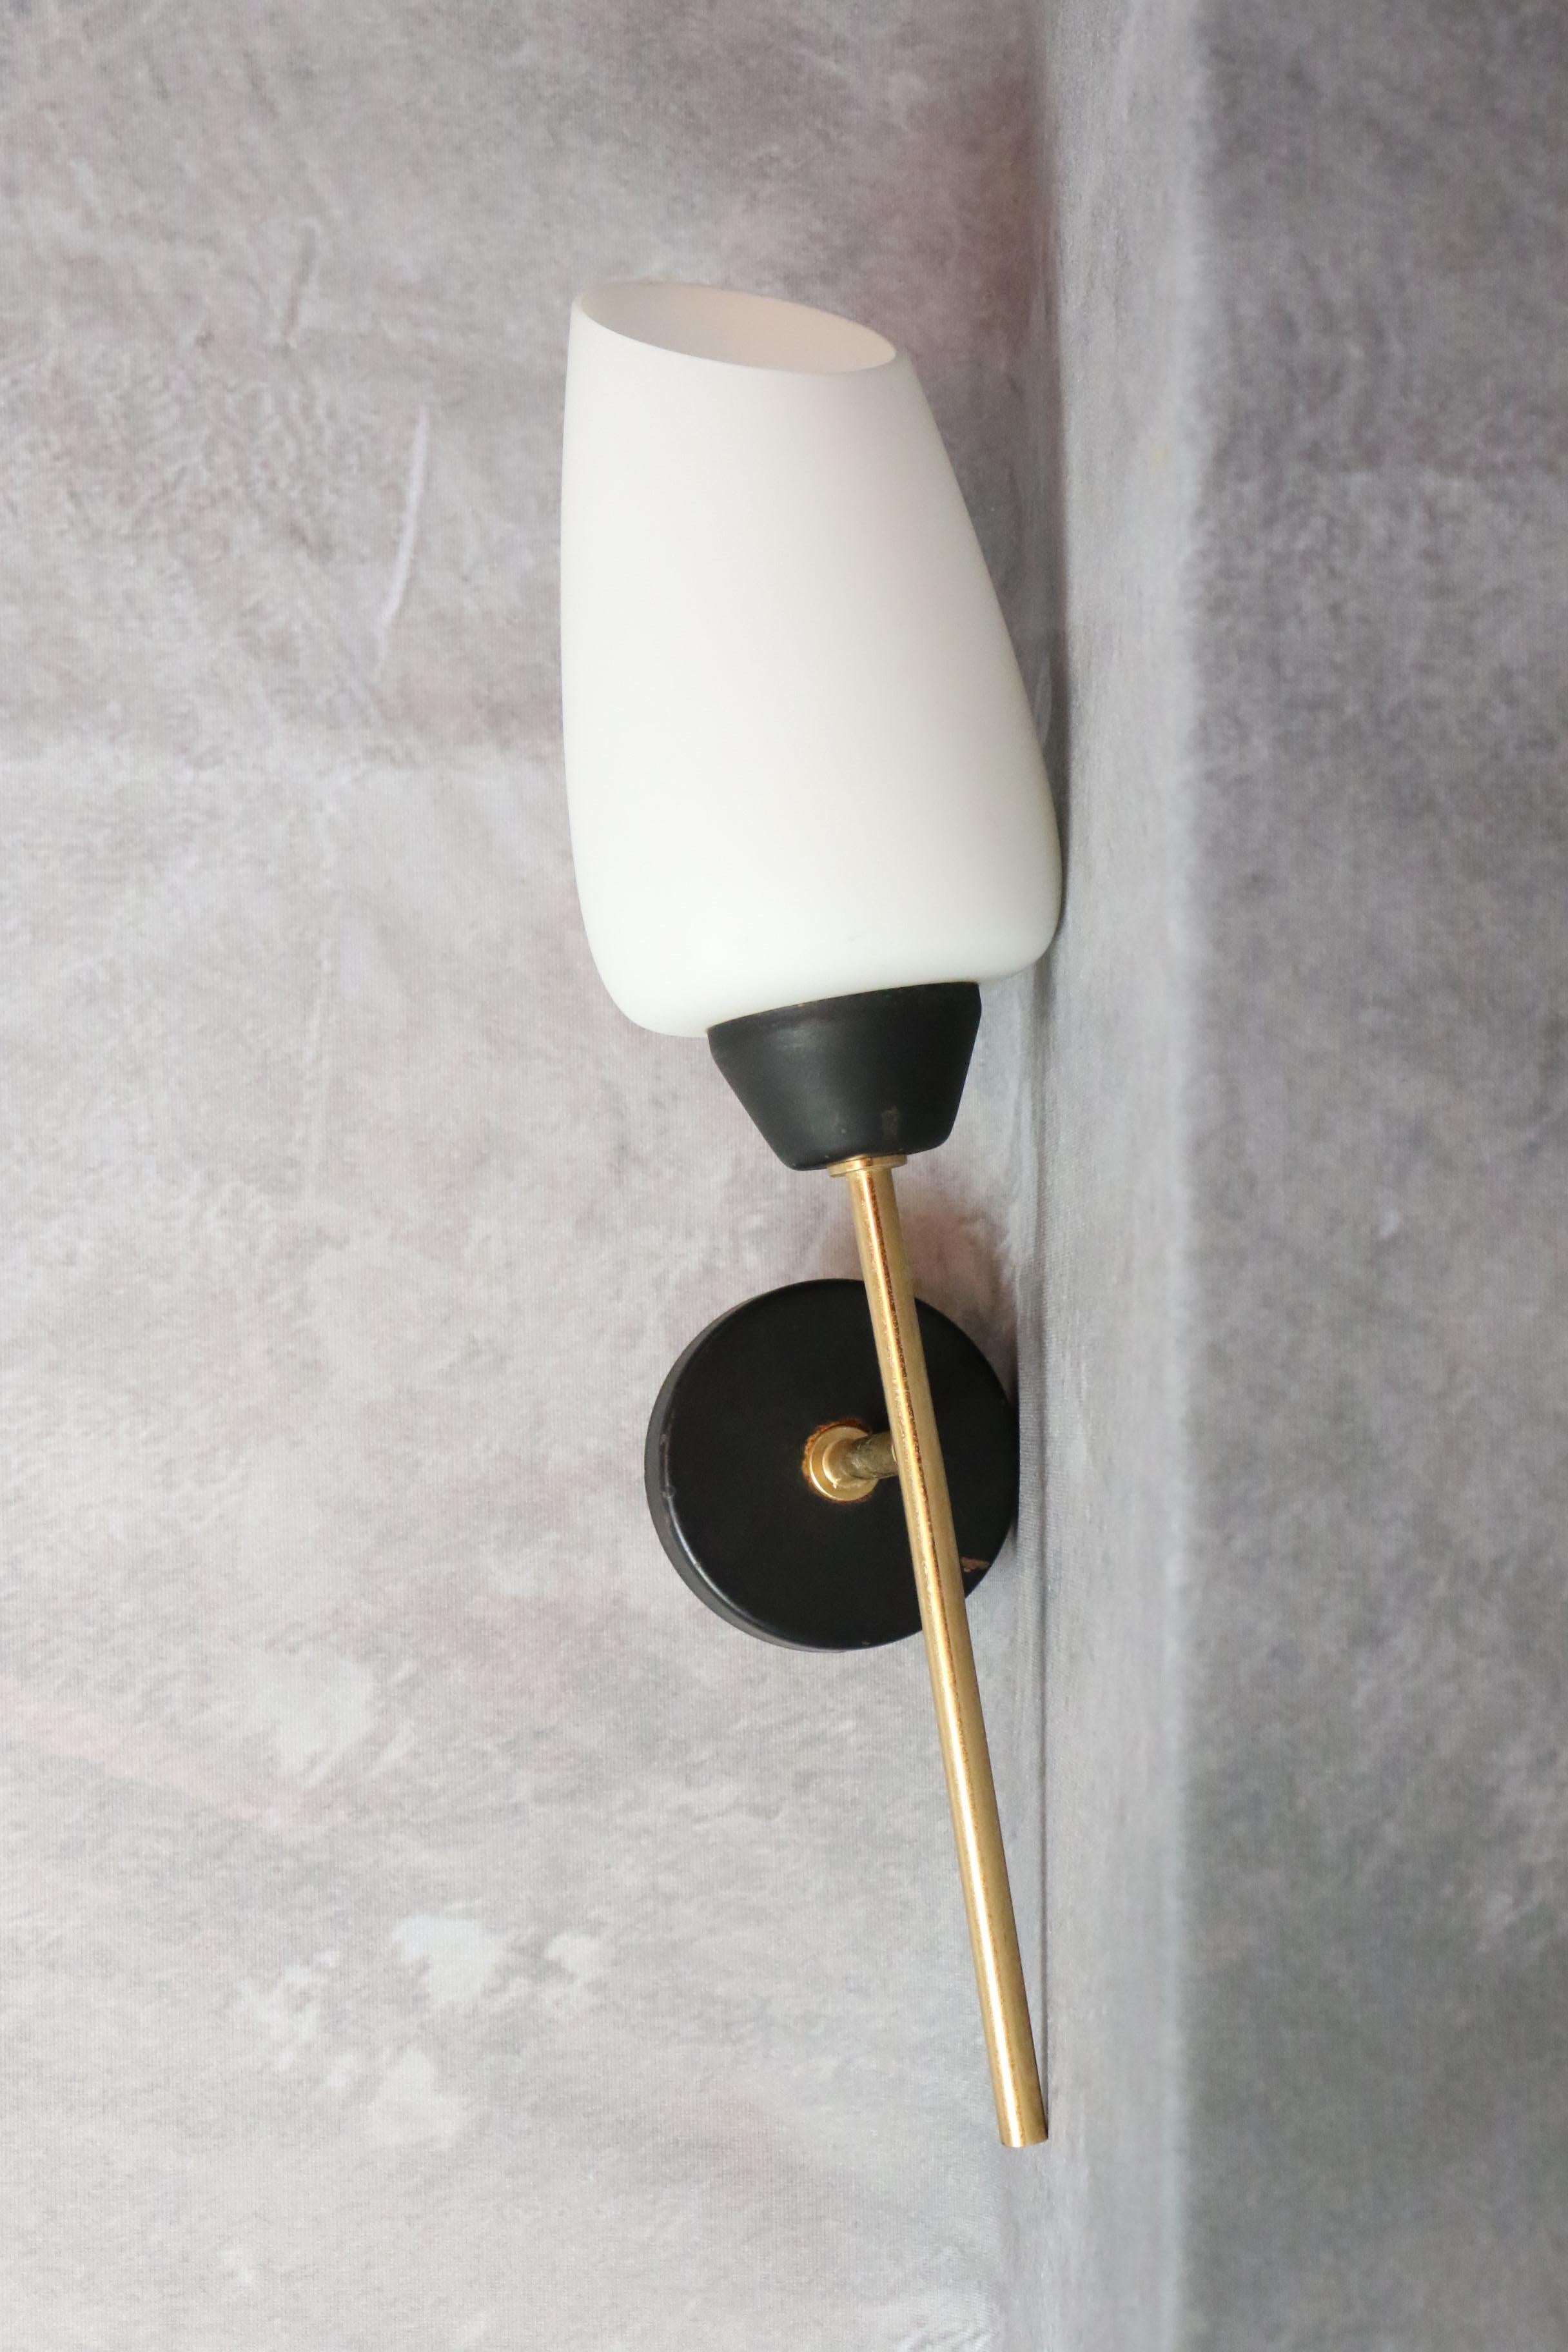 Metal Maison Lunel - Pair of Mid-Century Modern Wall lights - 1950s France For Sale